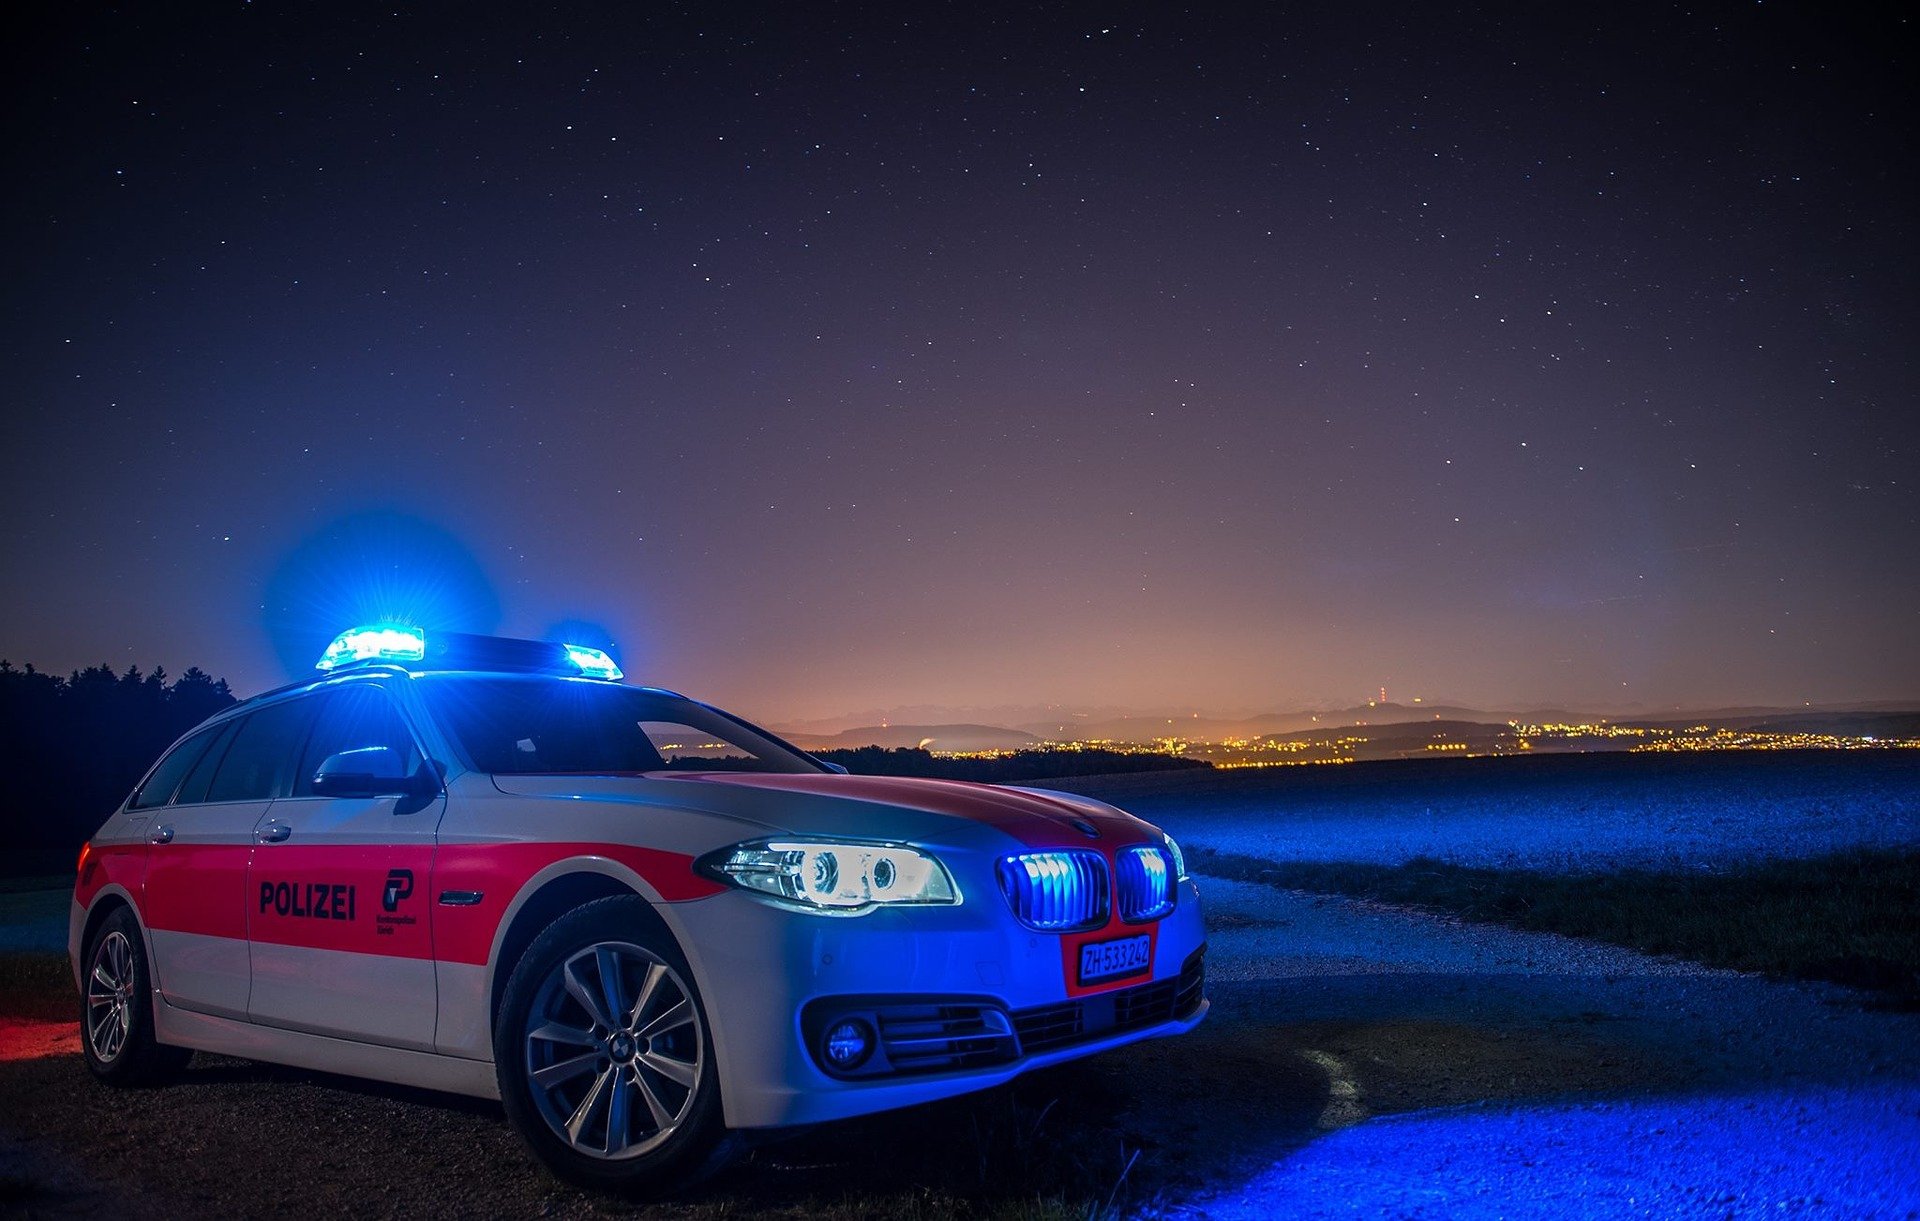 A police car with its blue lights on. | Photo: Pixabay/Raphi D